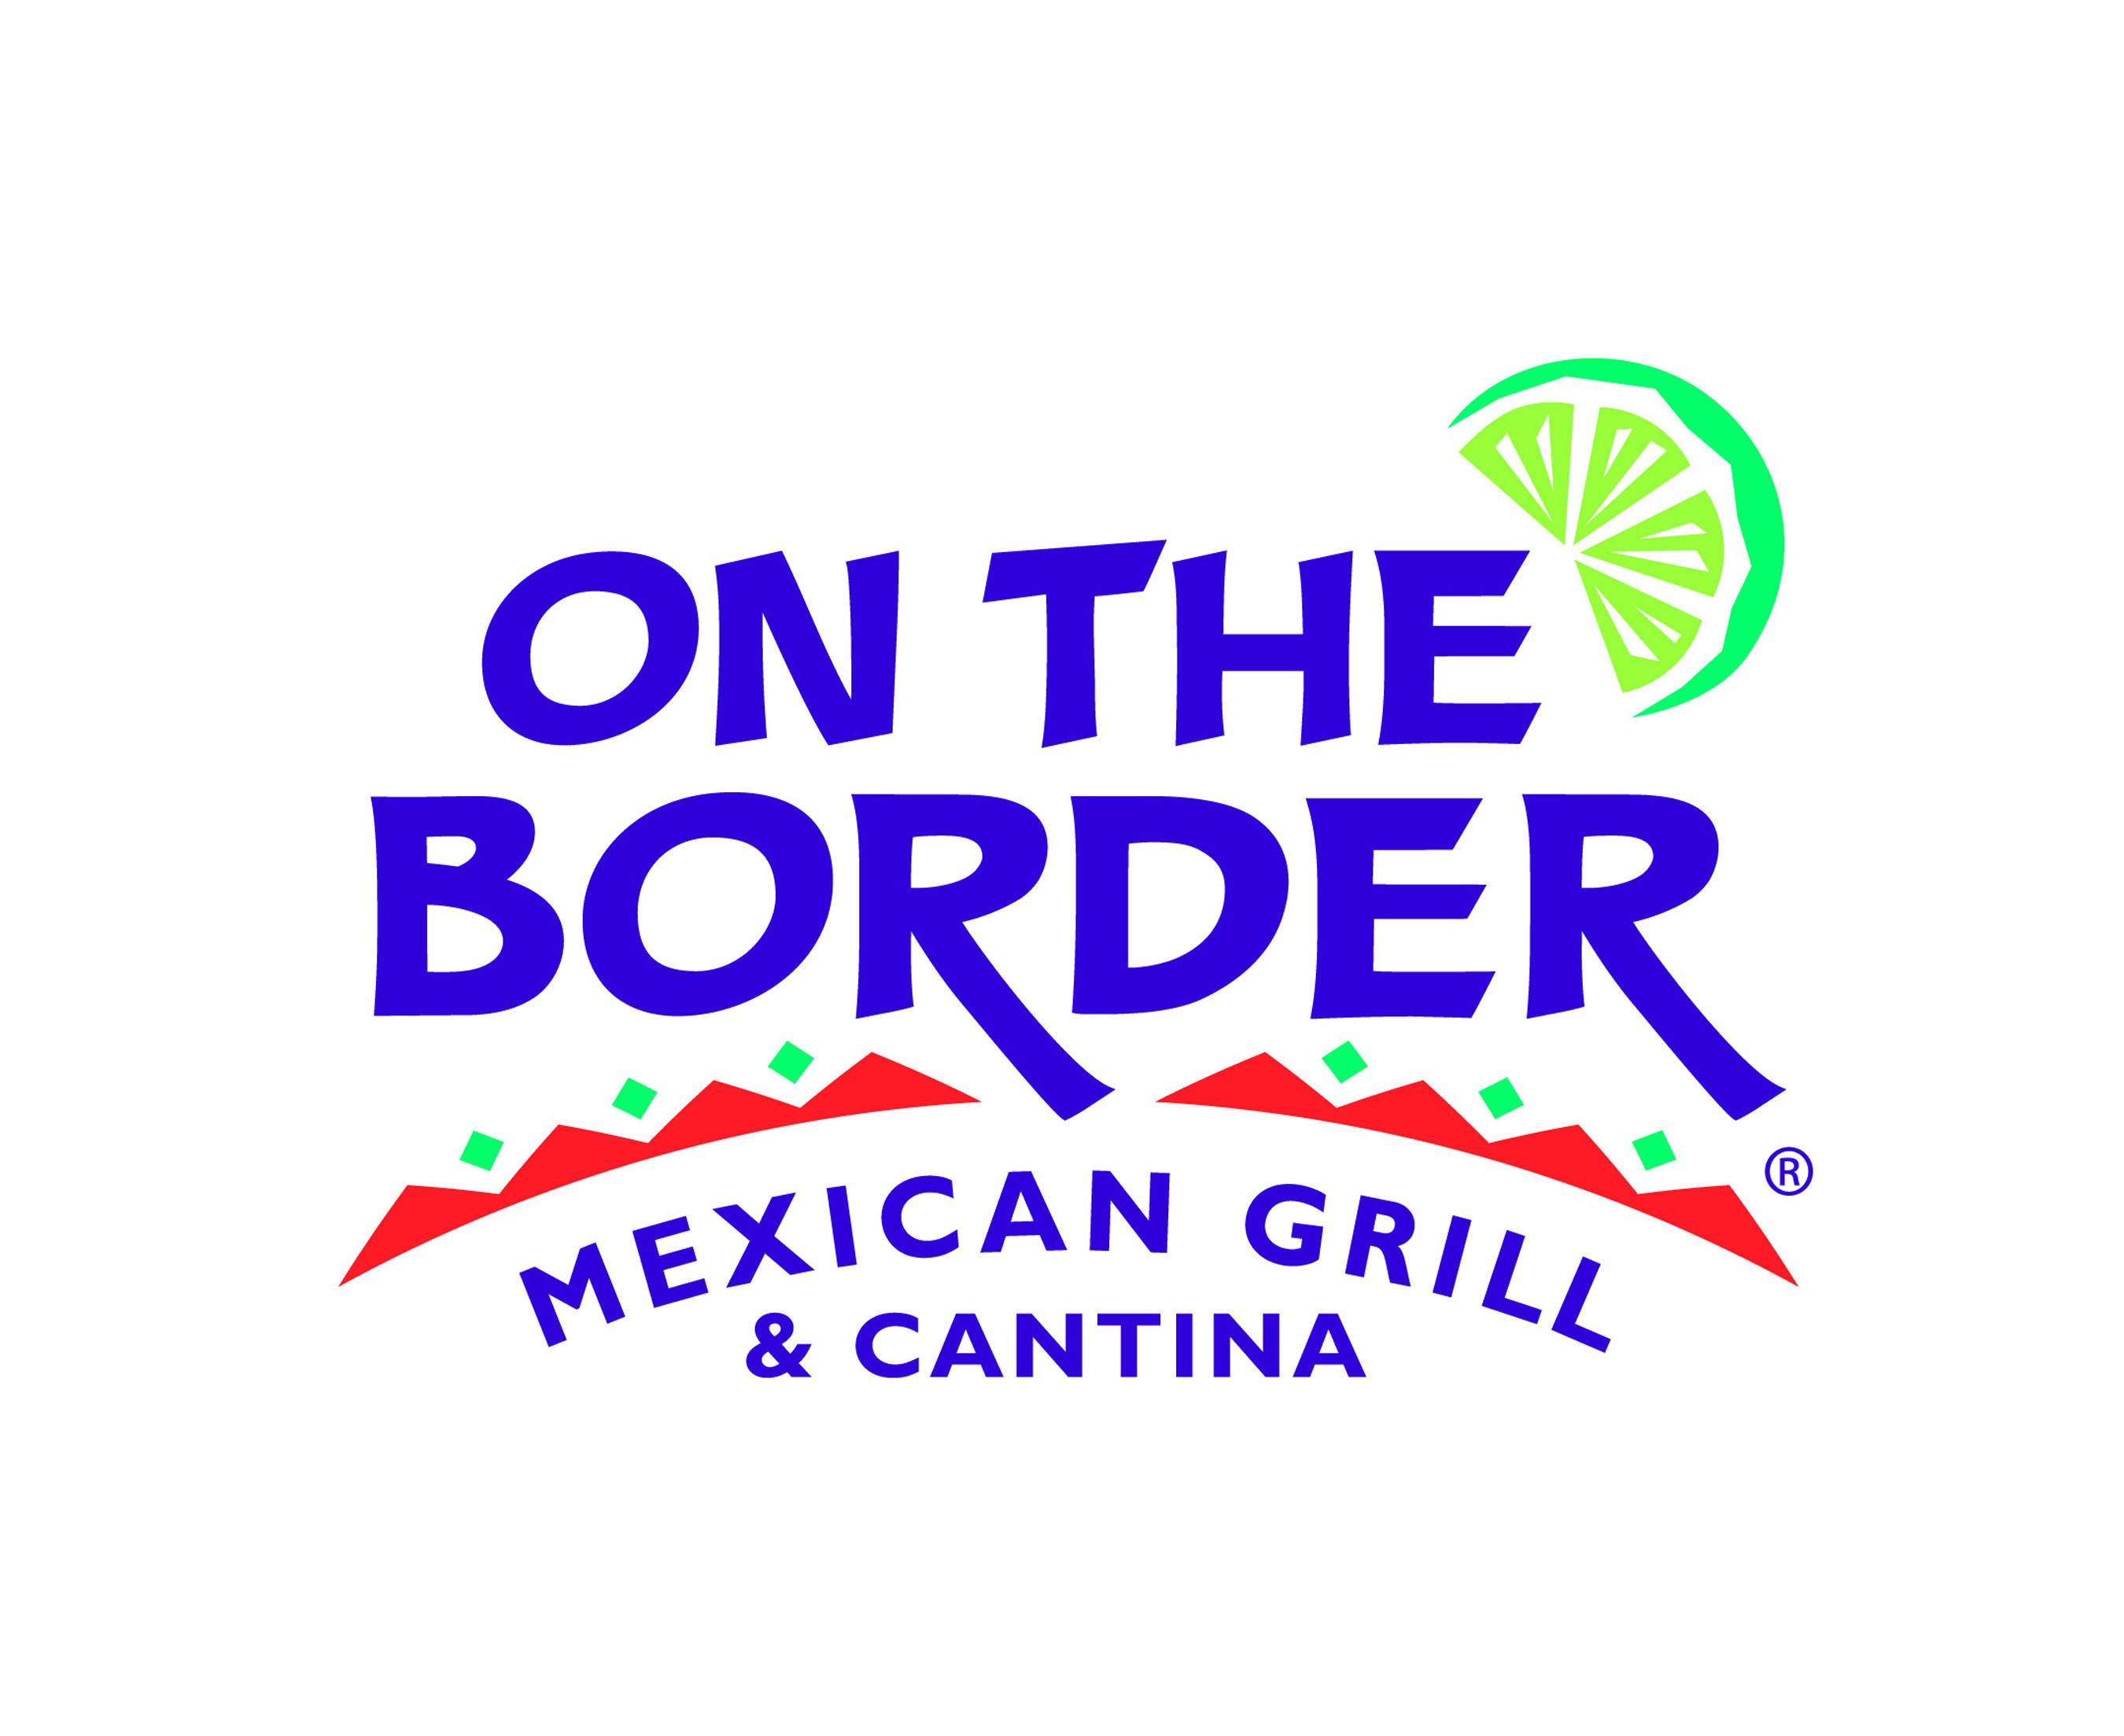 On The Border(R) Thanks Veterans and Troops More than 150 Ways with FREE "Create Your Own Combo" This Veterans Day. (PRNewsFoto/On The Border Mexican Grill & Cantina) (PRNewsFoto/ON THE BORDER MEXICAN GRILL...)